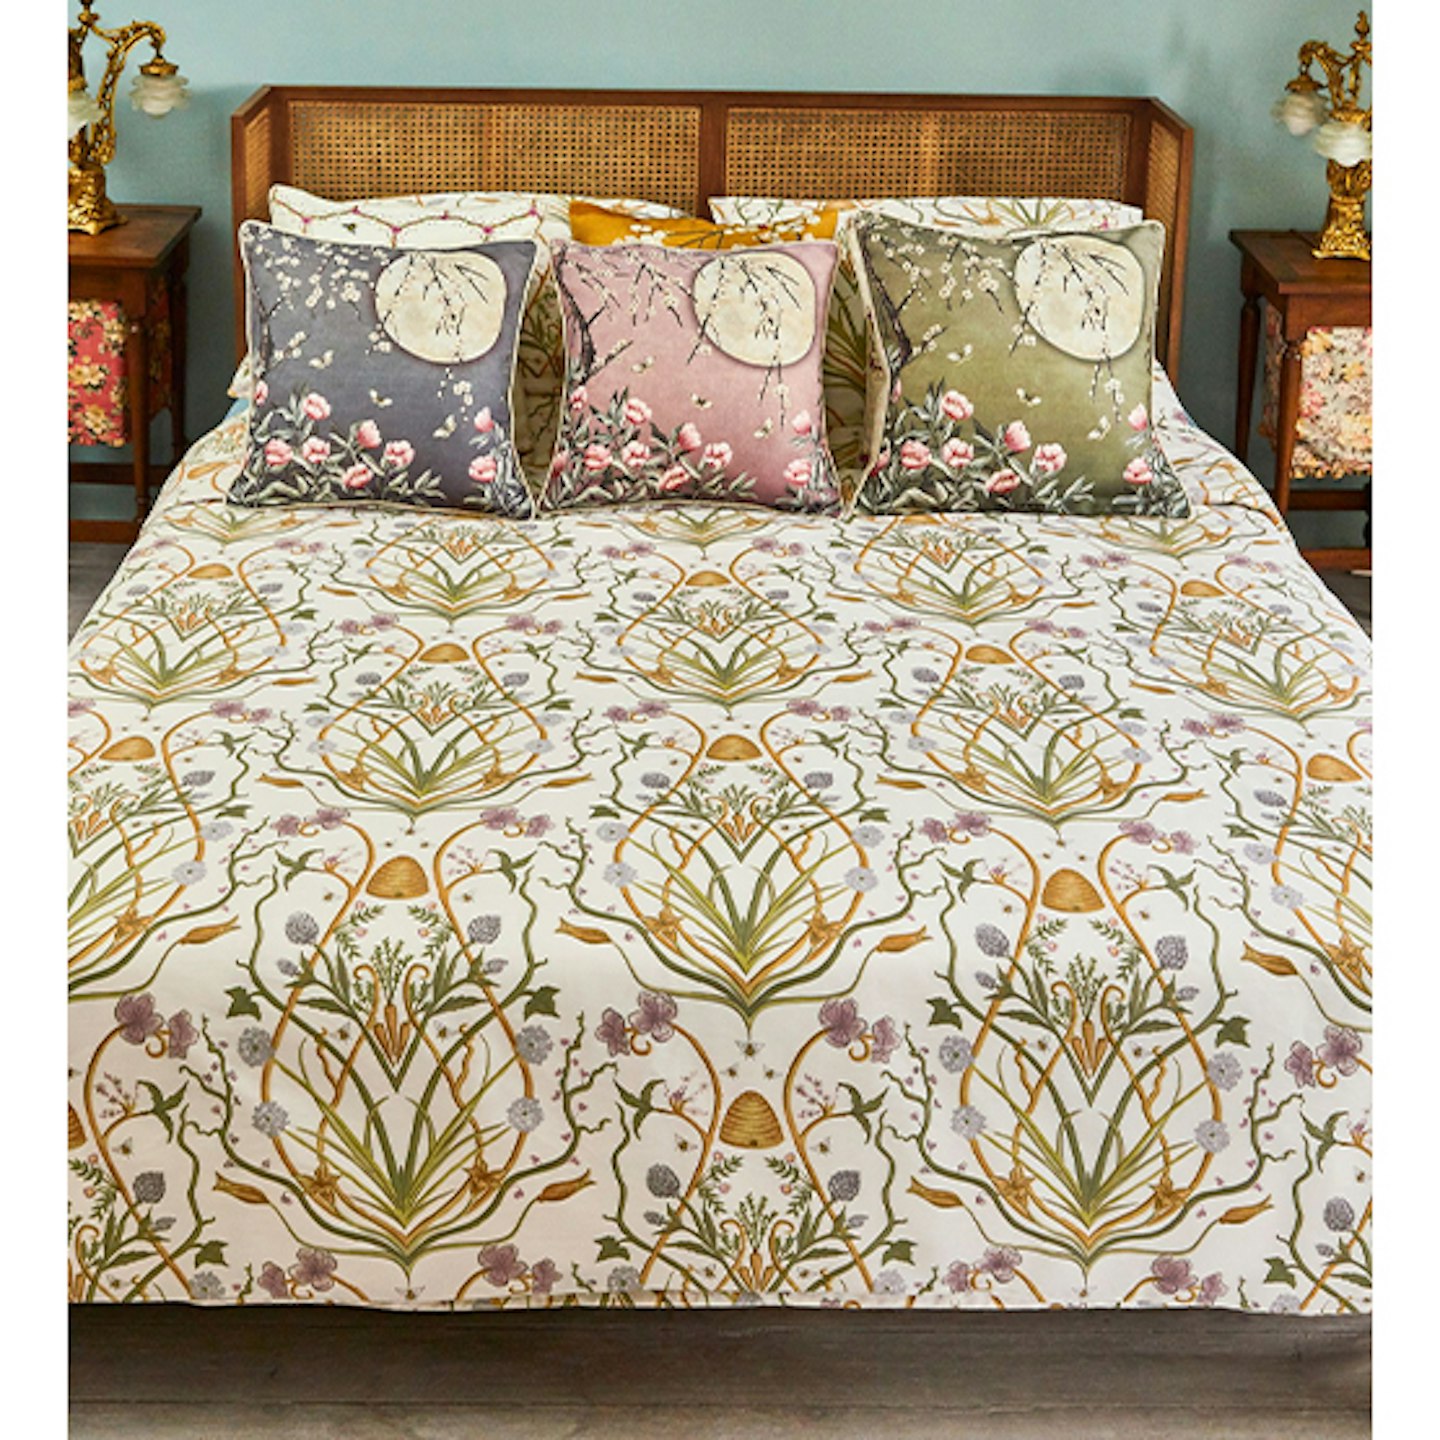 The Chateau by Angel Strawbridge Potagerie Cotton Duvet Cover and Pillowcase Set